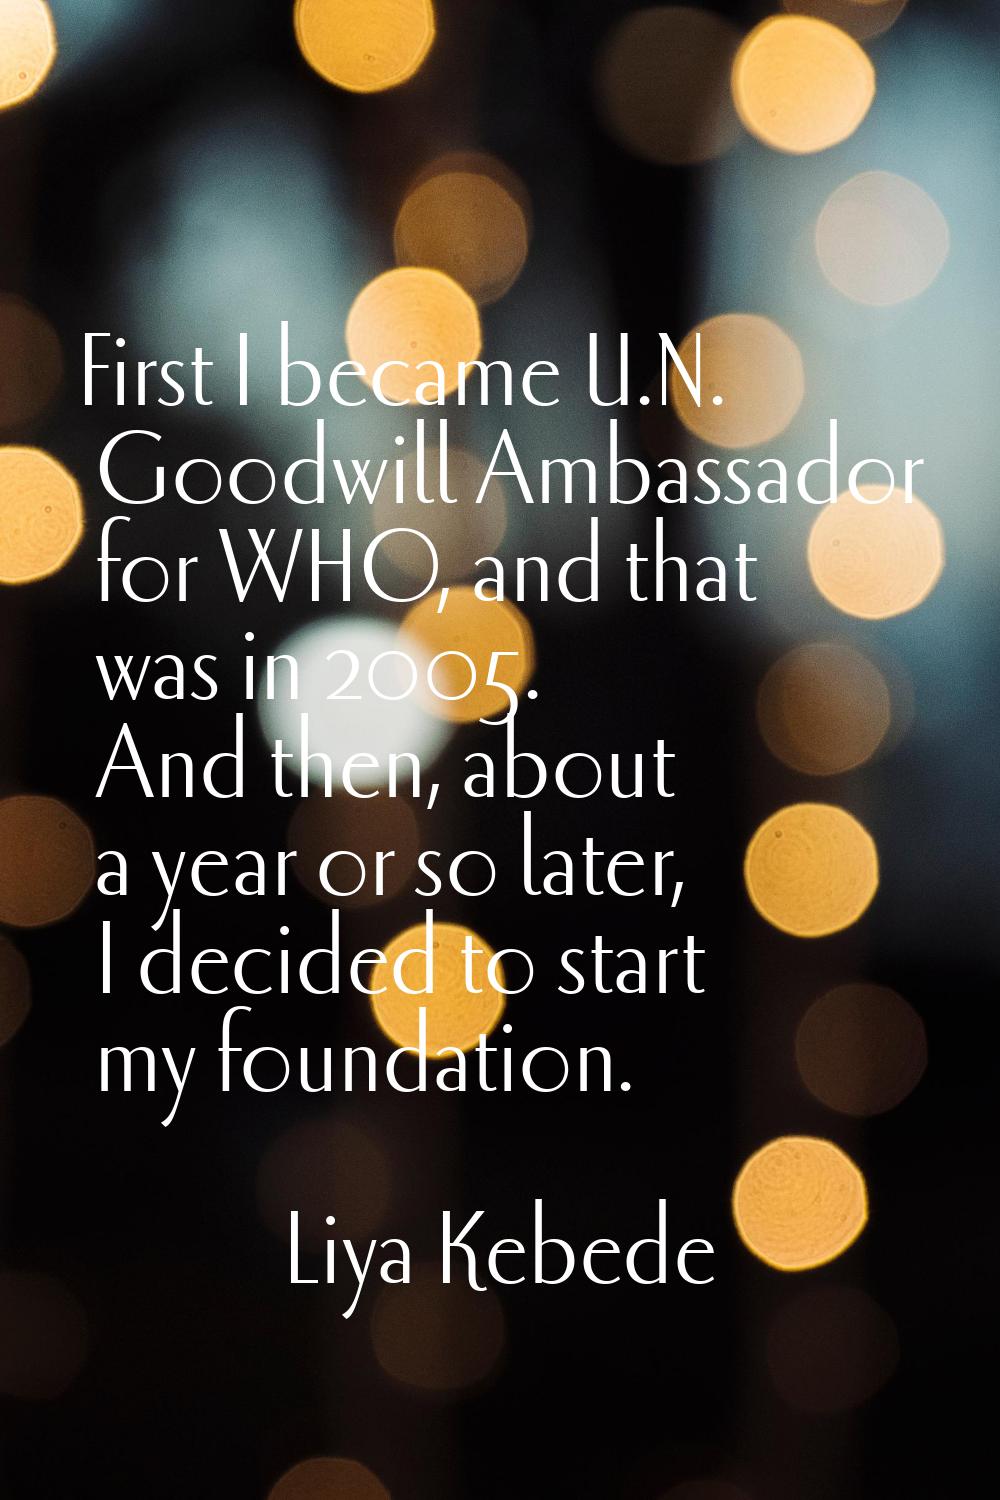 First I became U.N. Goodwill Ambassador for WHO, and that was in 2005. And then, about a year or so